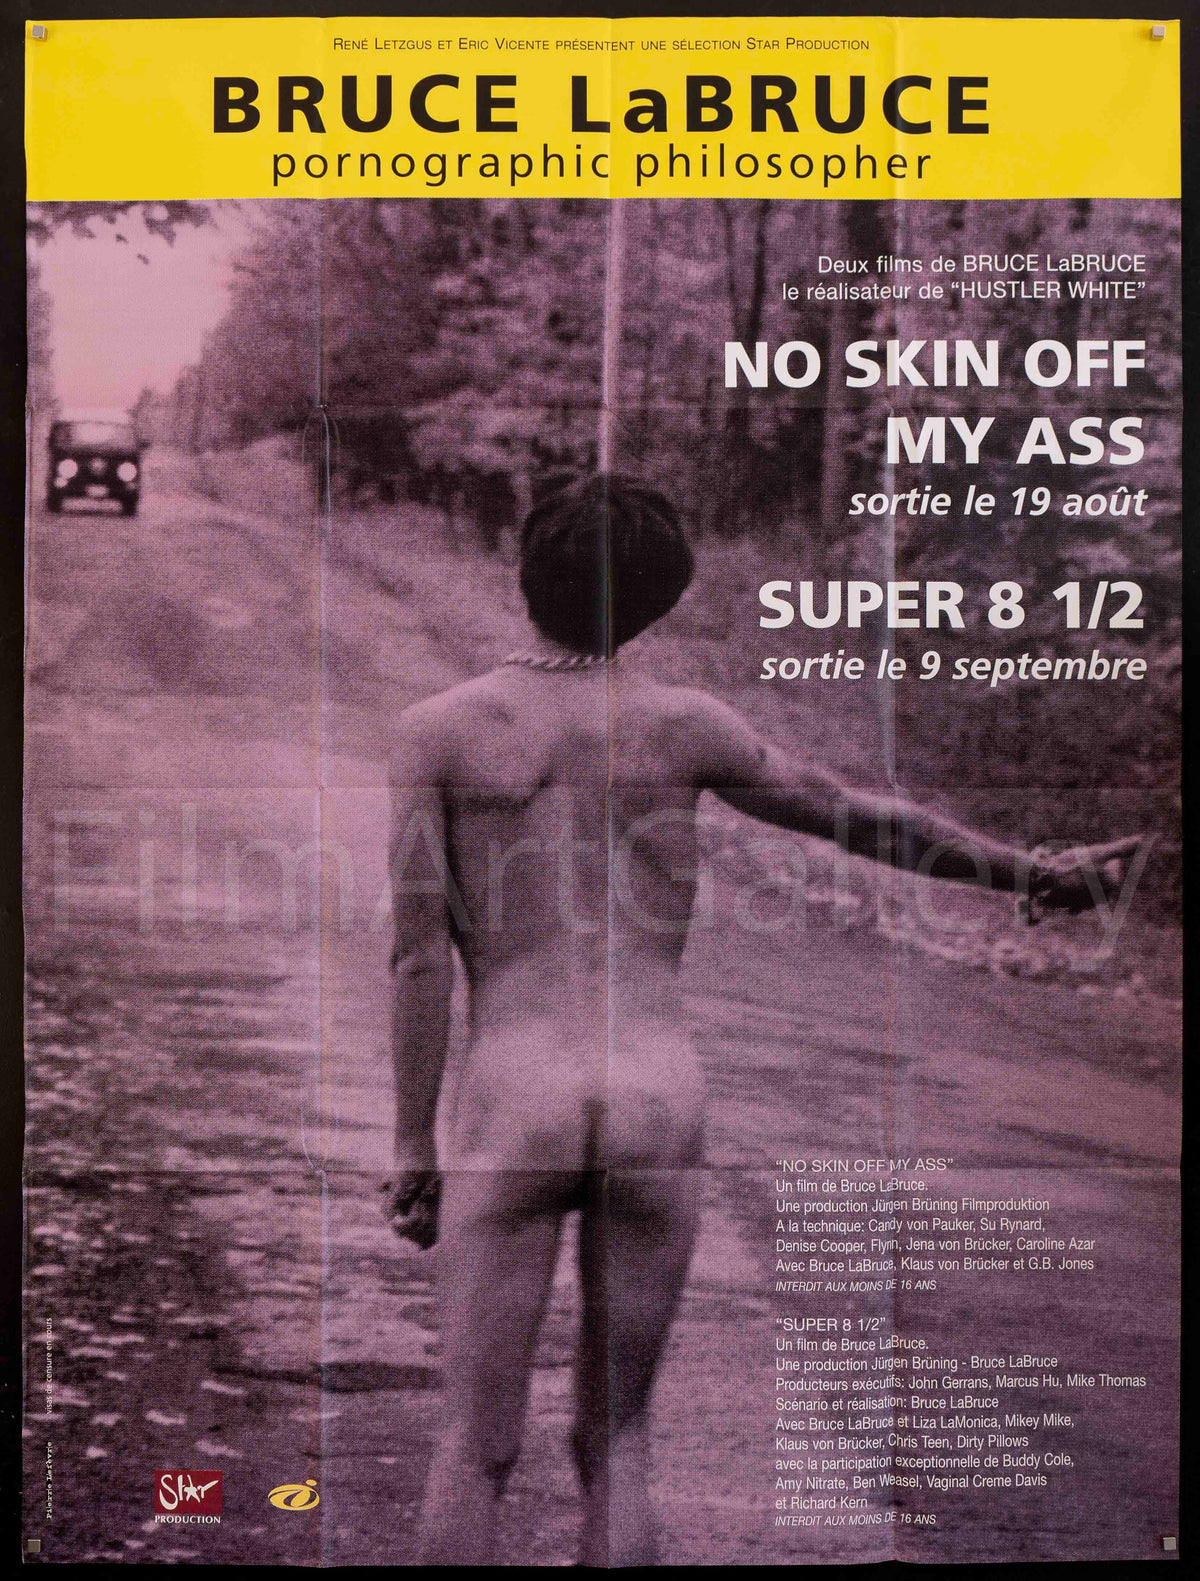 Bruce LaBruce - No Skin off My Ass / Super 8 1/2 French 1 panel (47x63) Original Vintage Movie Poster